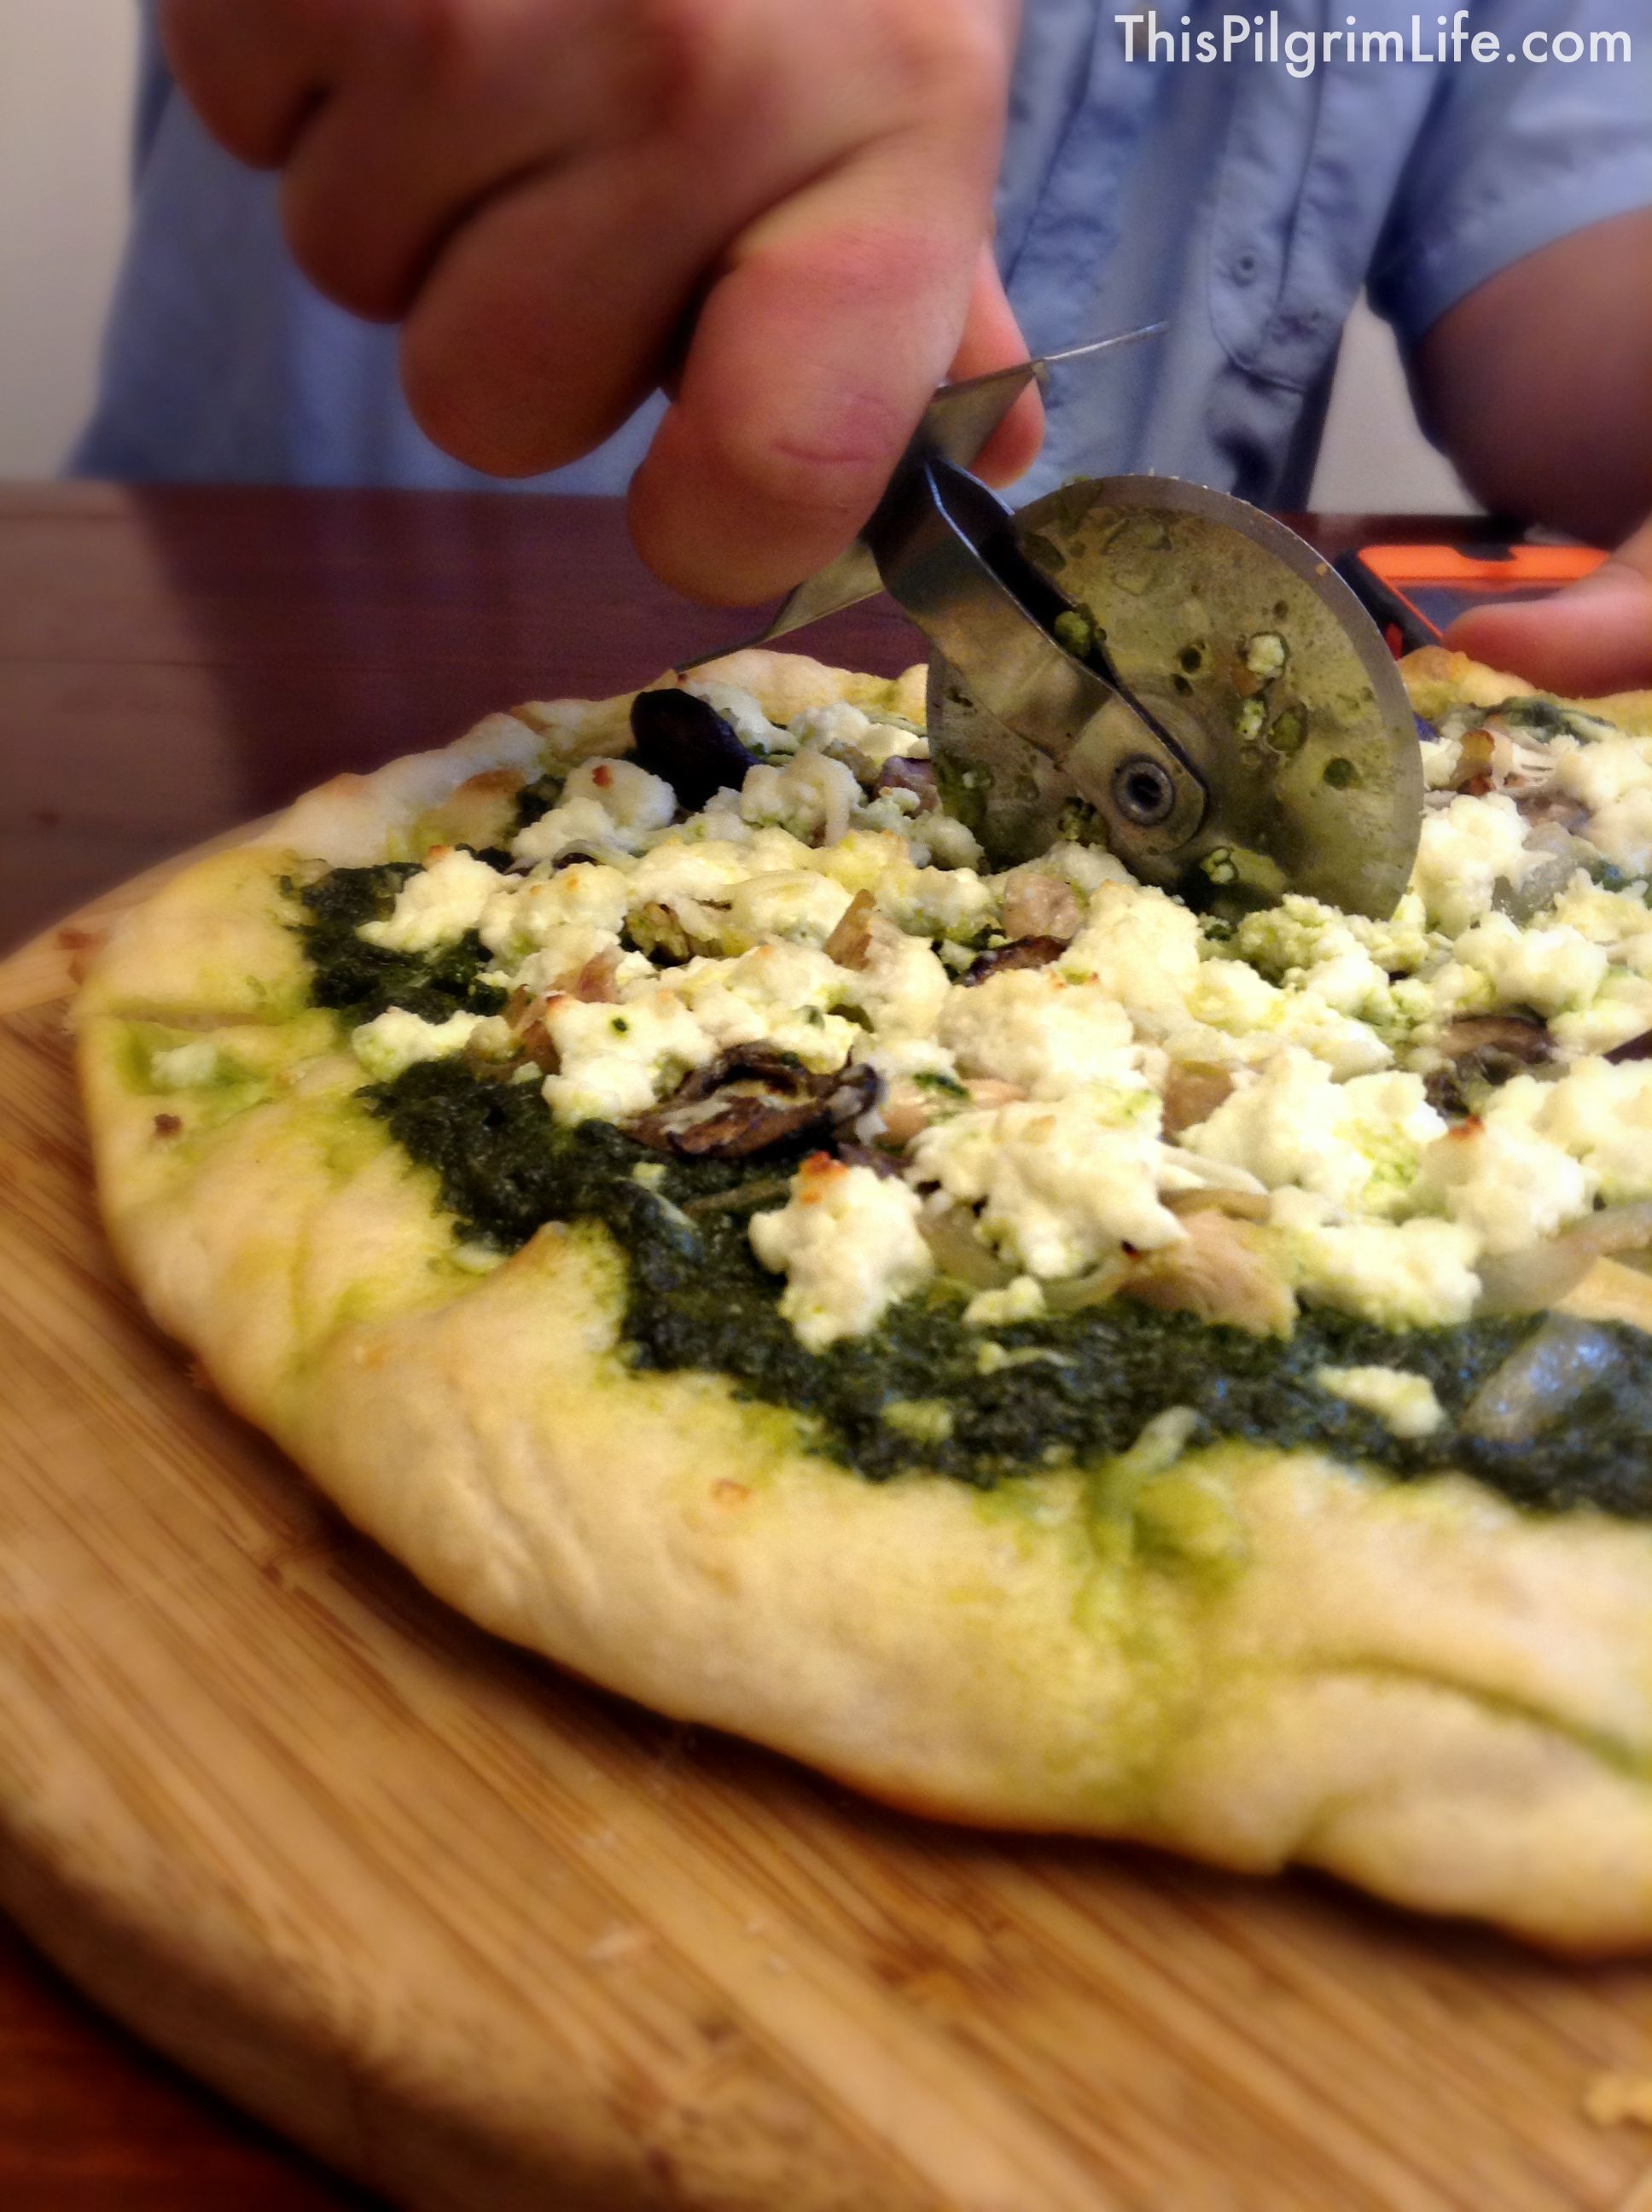 I LOVE homemade pizza, especially when it can be made quickly with ingredients I already have on hand like this pesto pizza! 